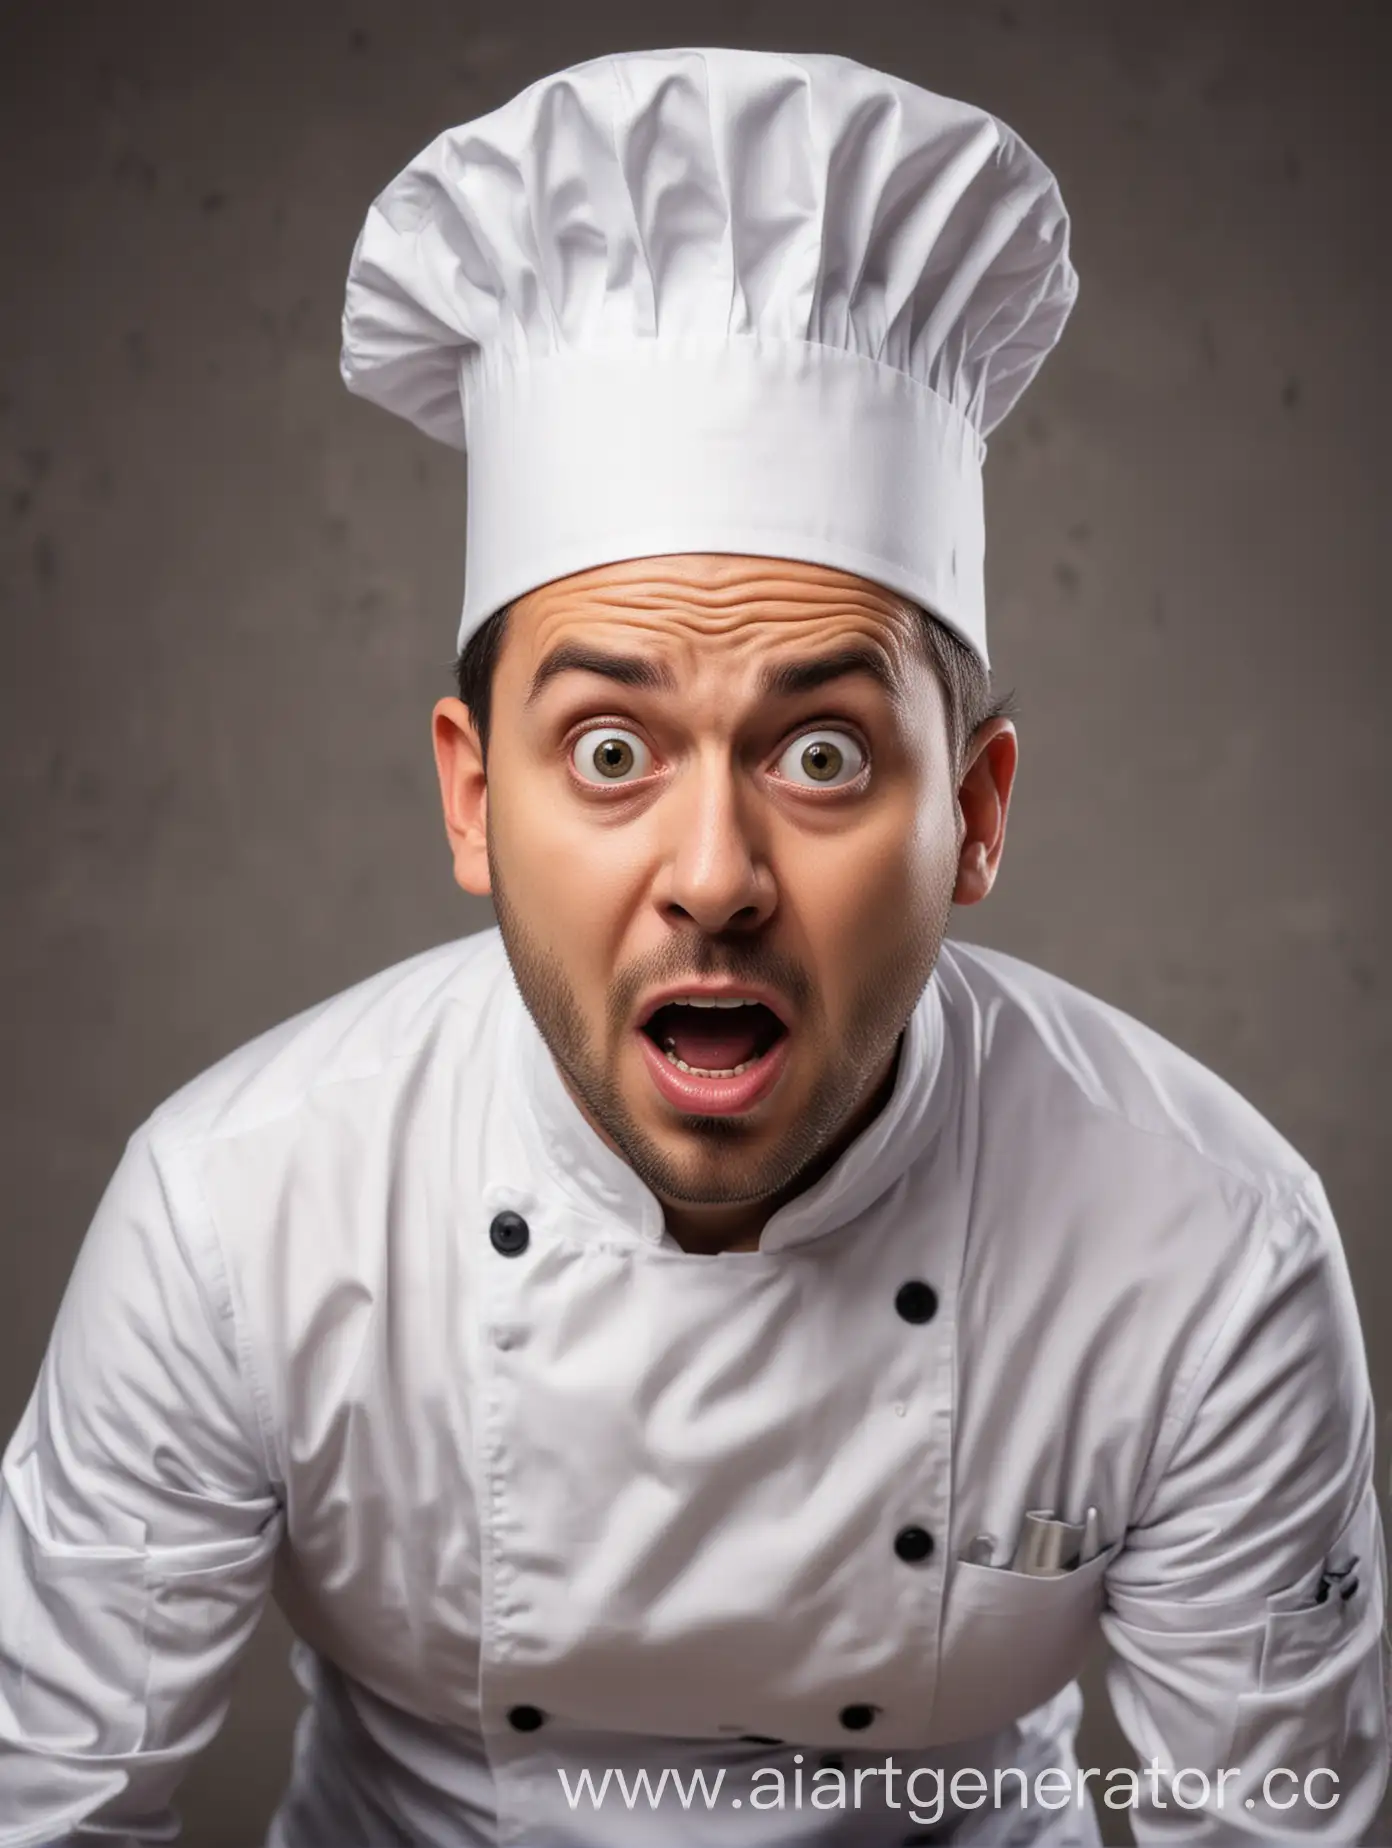 Surprised-Chef-with-Slight-Fear-Profile-View